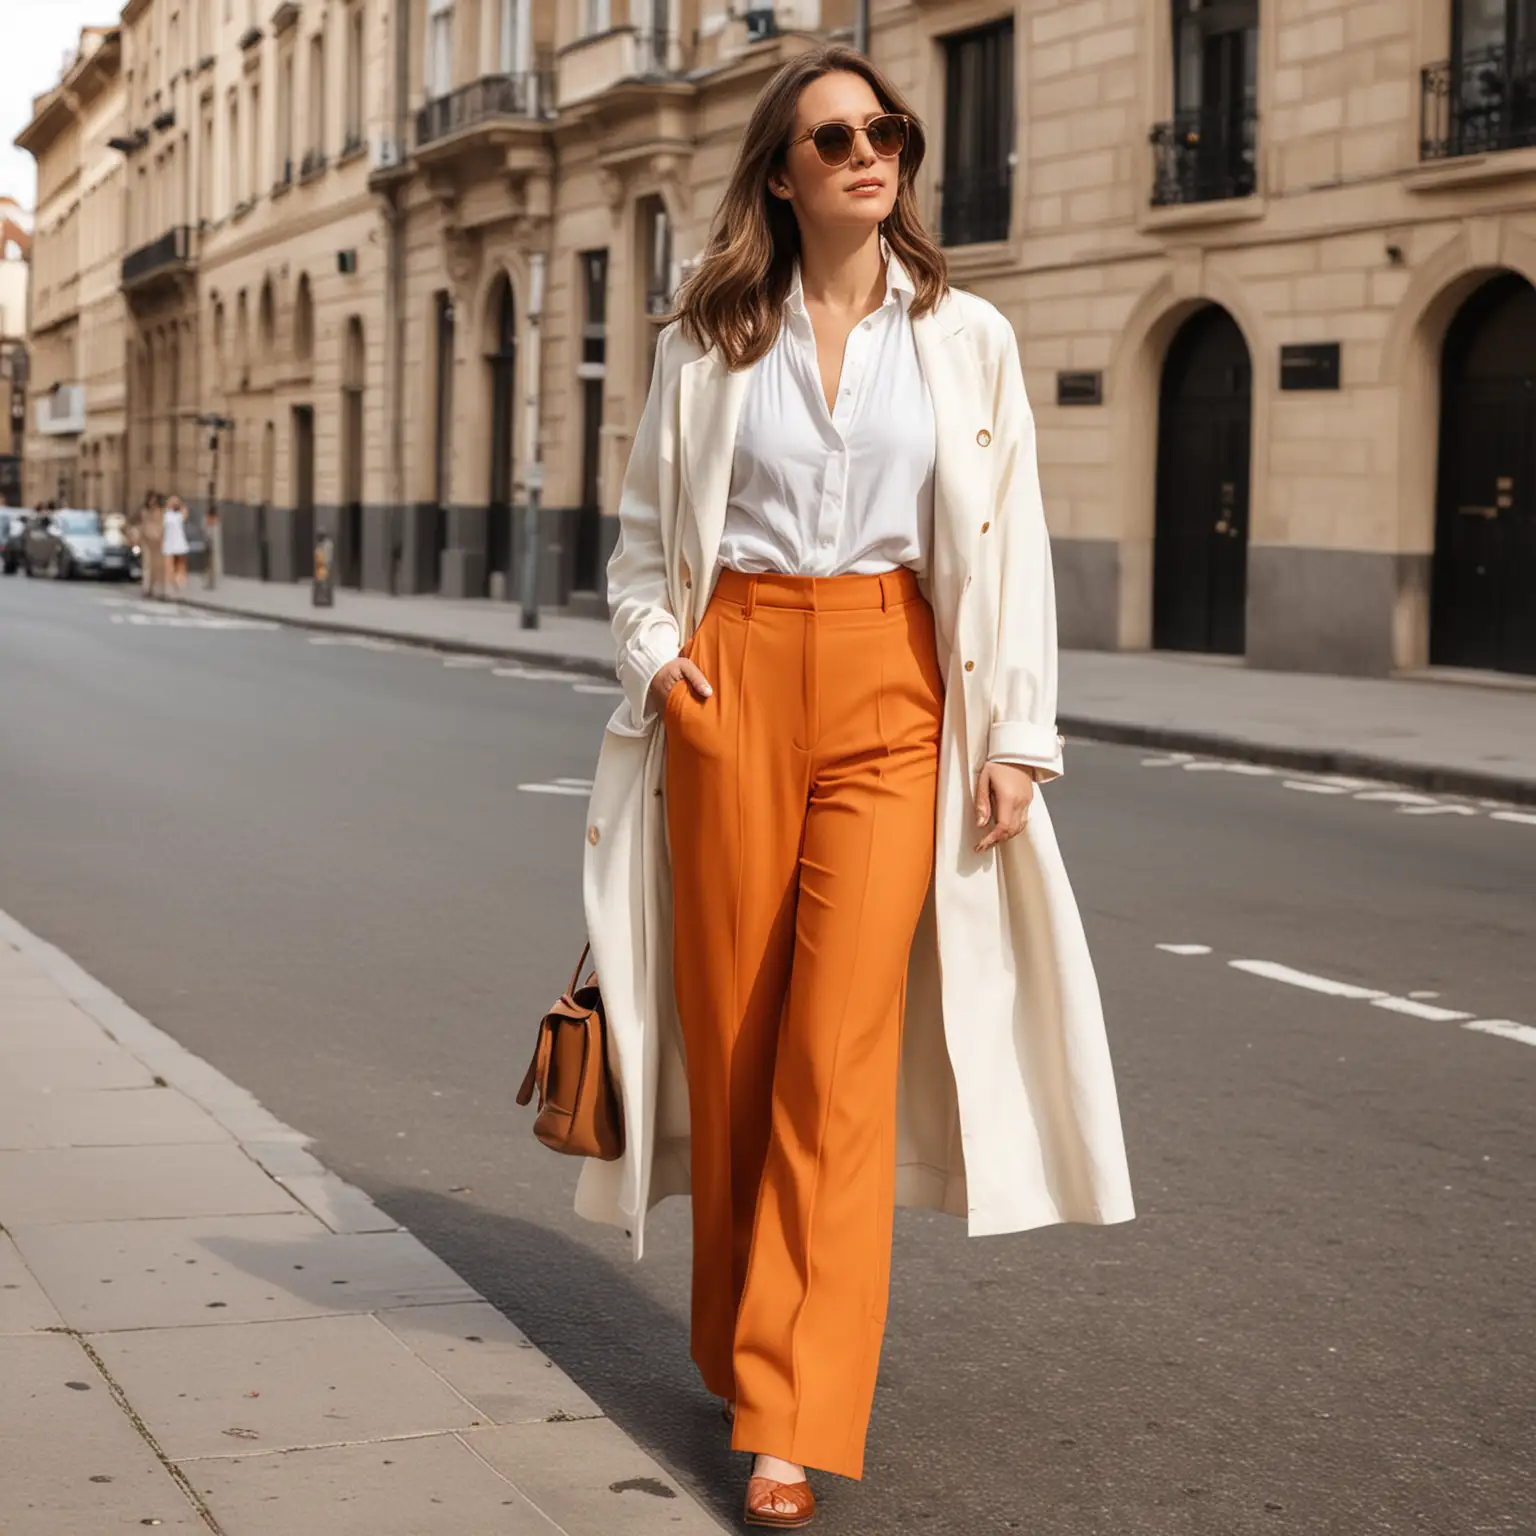 Fashionable Woman in Orange WideLegged Trousers and CreamColored Coat